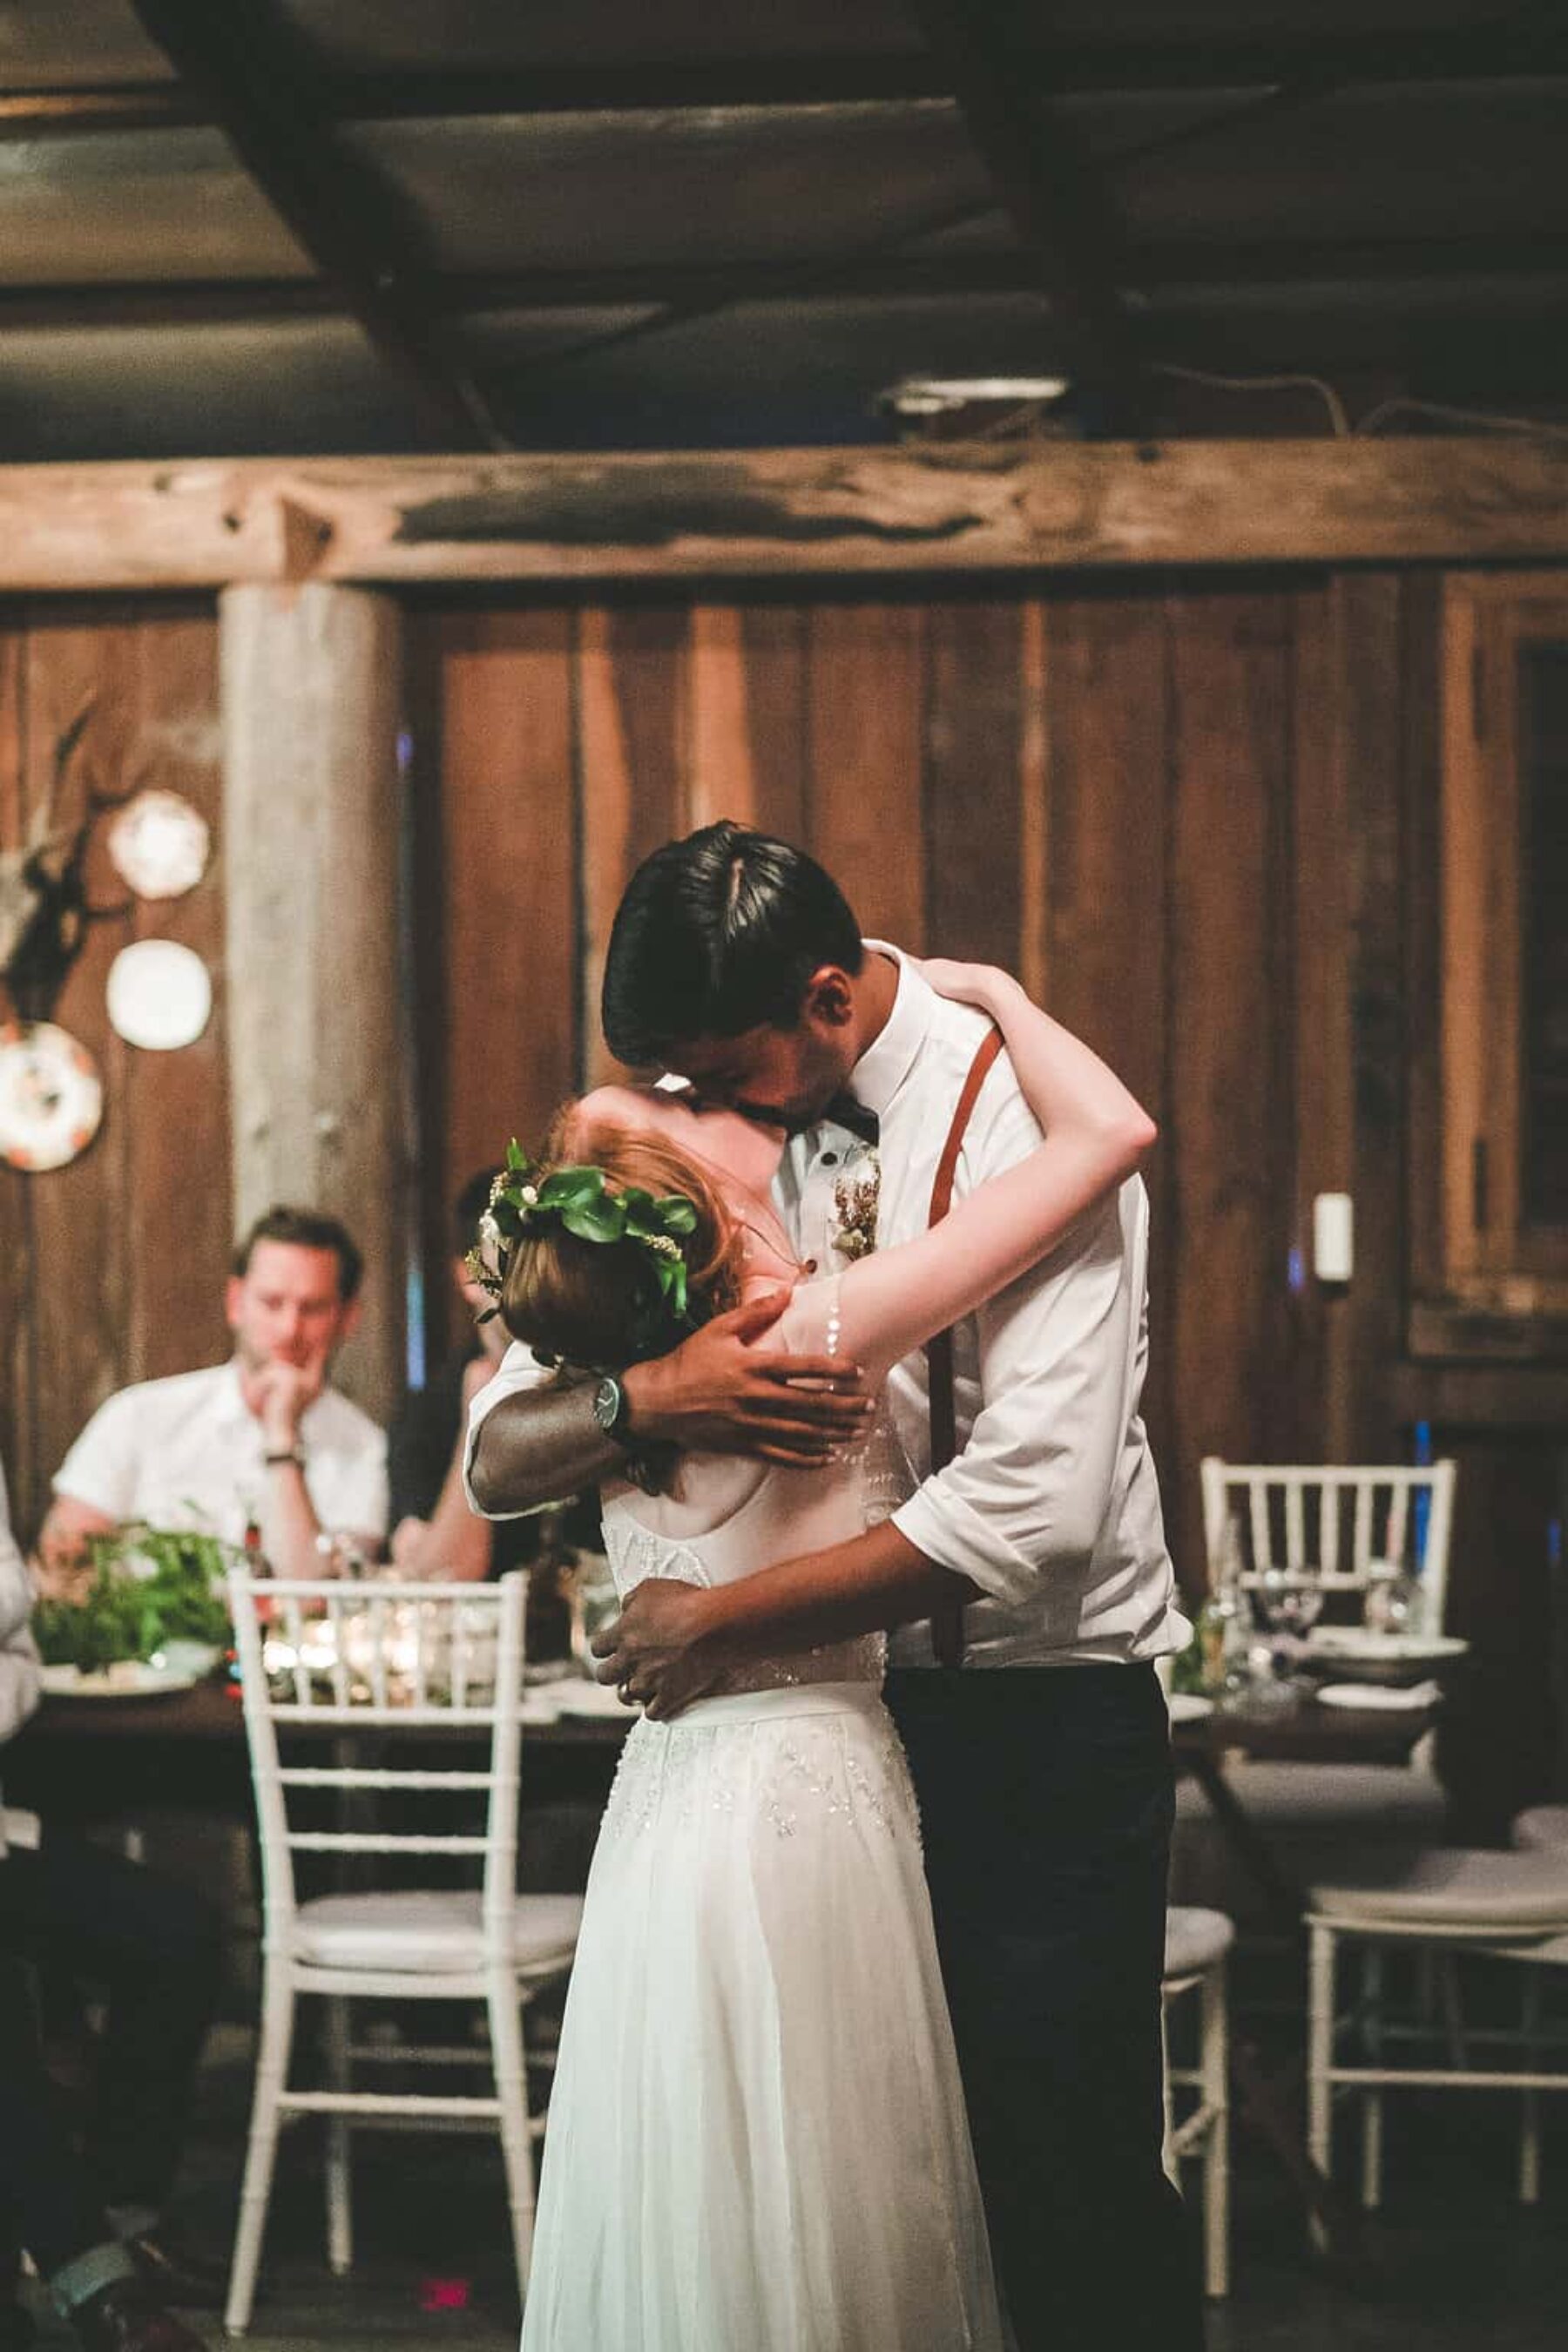 Rustic barn wedding at the Sydney Polo Club | Photography by Athena Grace